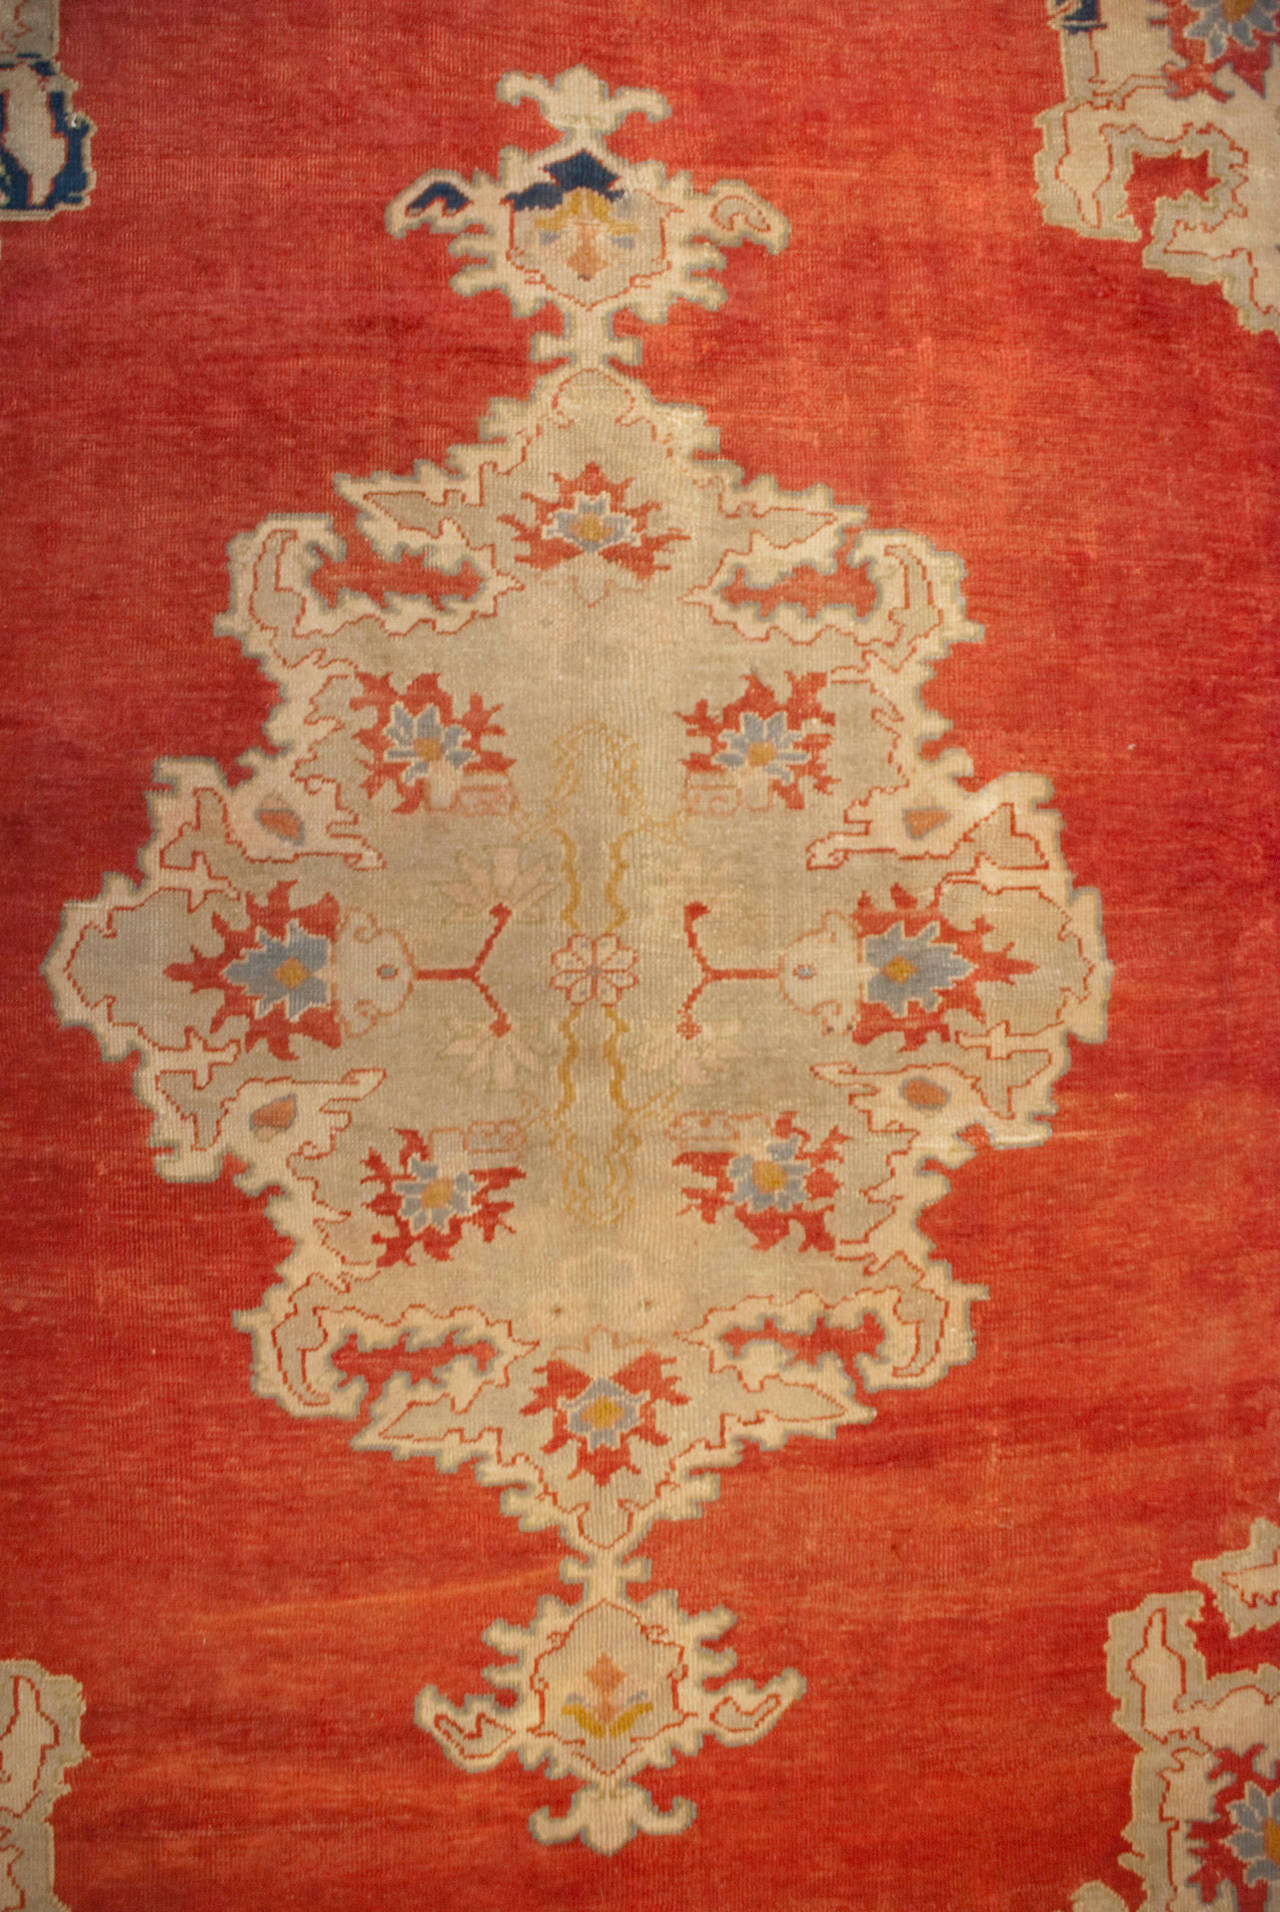 An amazing late 19th century Persian Sultanabad rug with a large central floral medallion on a rich crimson background, surrounded by a complementary floral border with an asymmetrical indigo border.